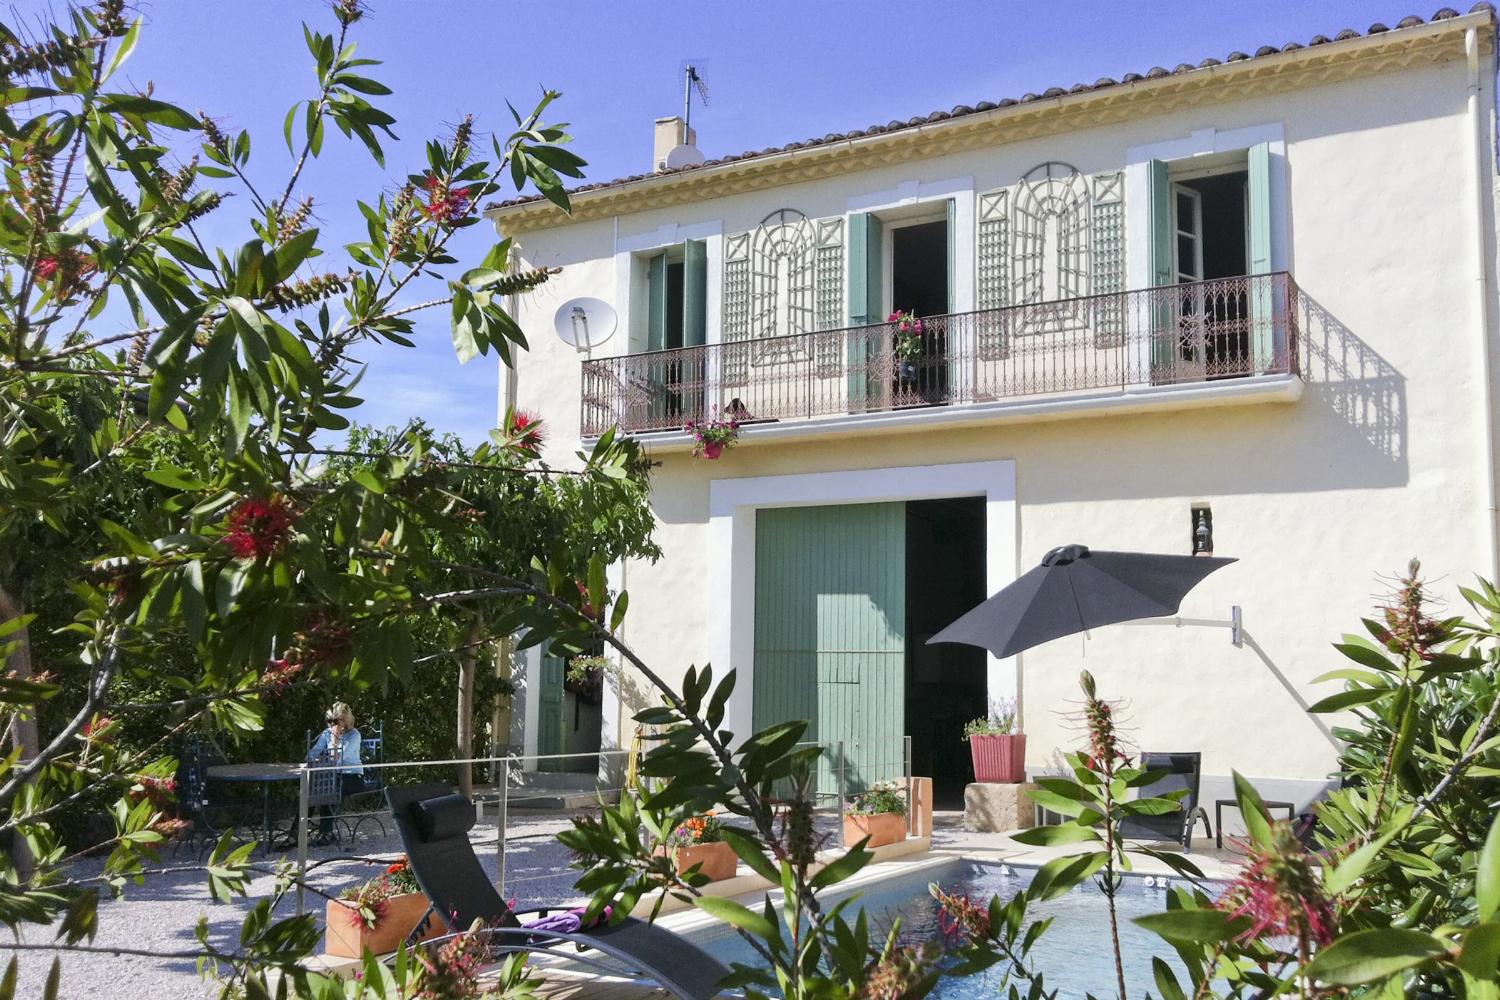 Holiday home in the South of France with private heated pool